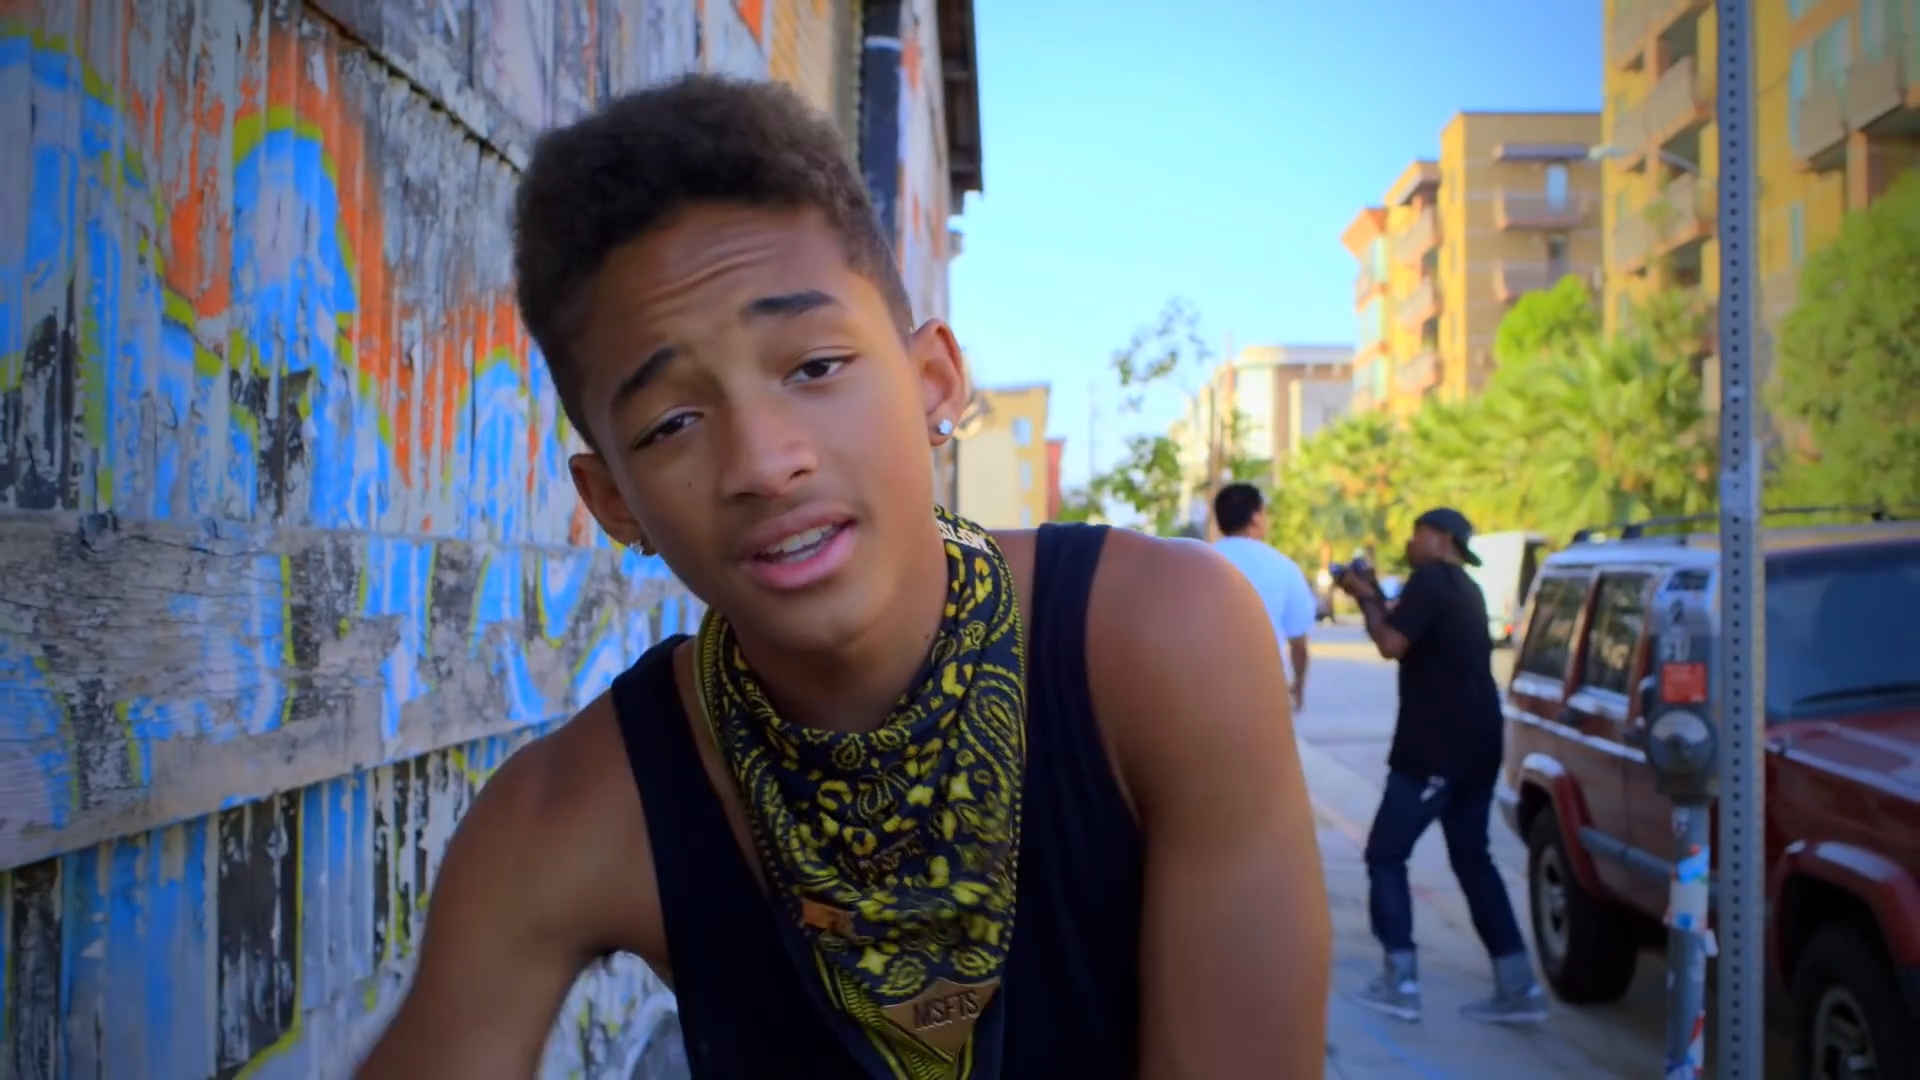 Picture Of Jaden Smith In Music Video The Coolest Jaden Smith 1643333170 Teen Idols 4 You 4724